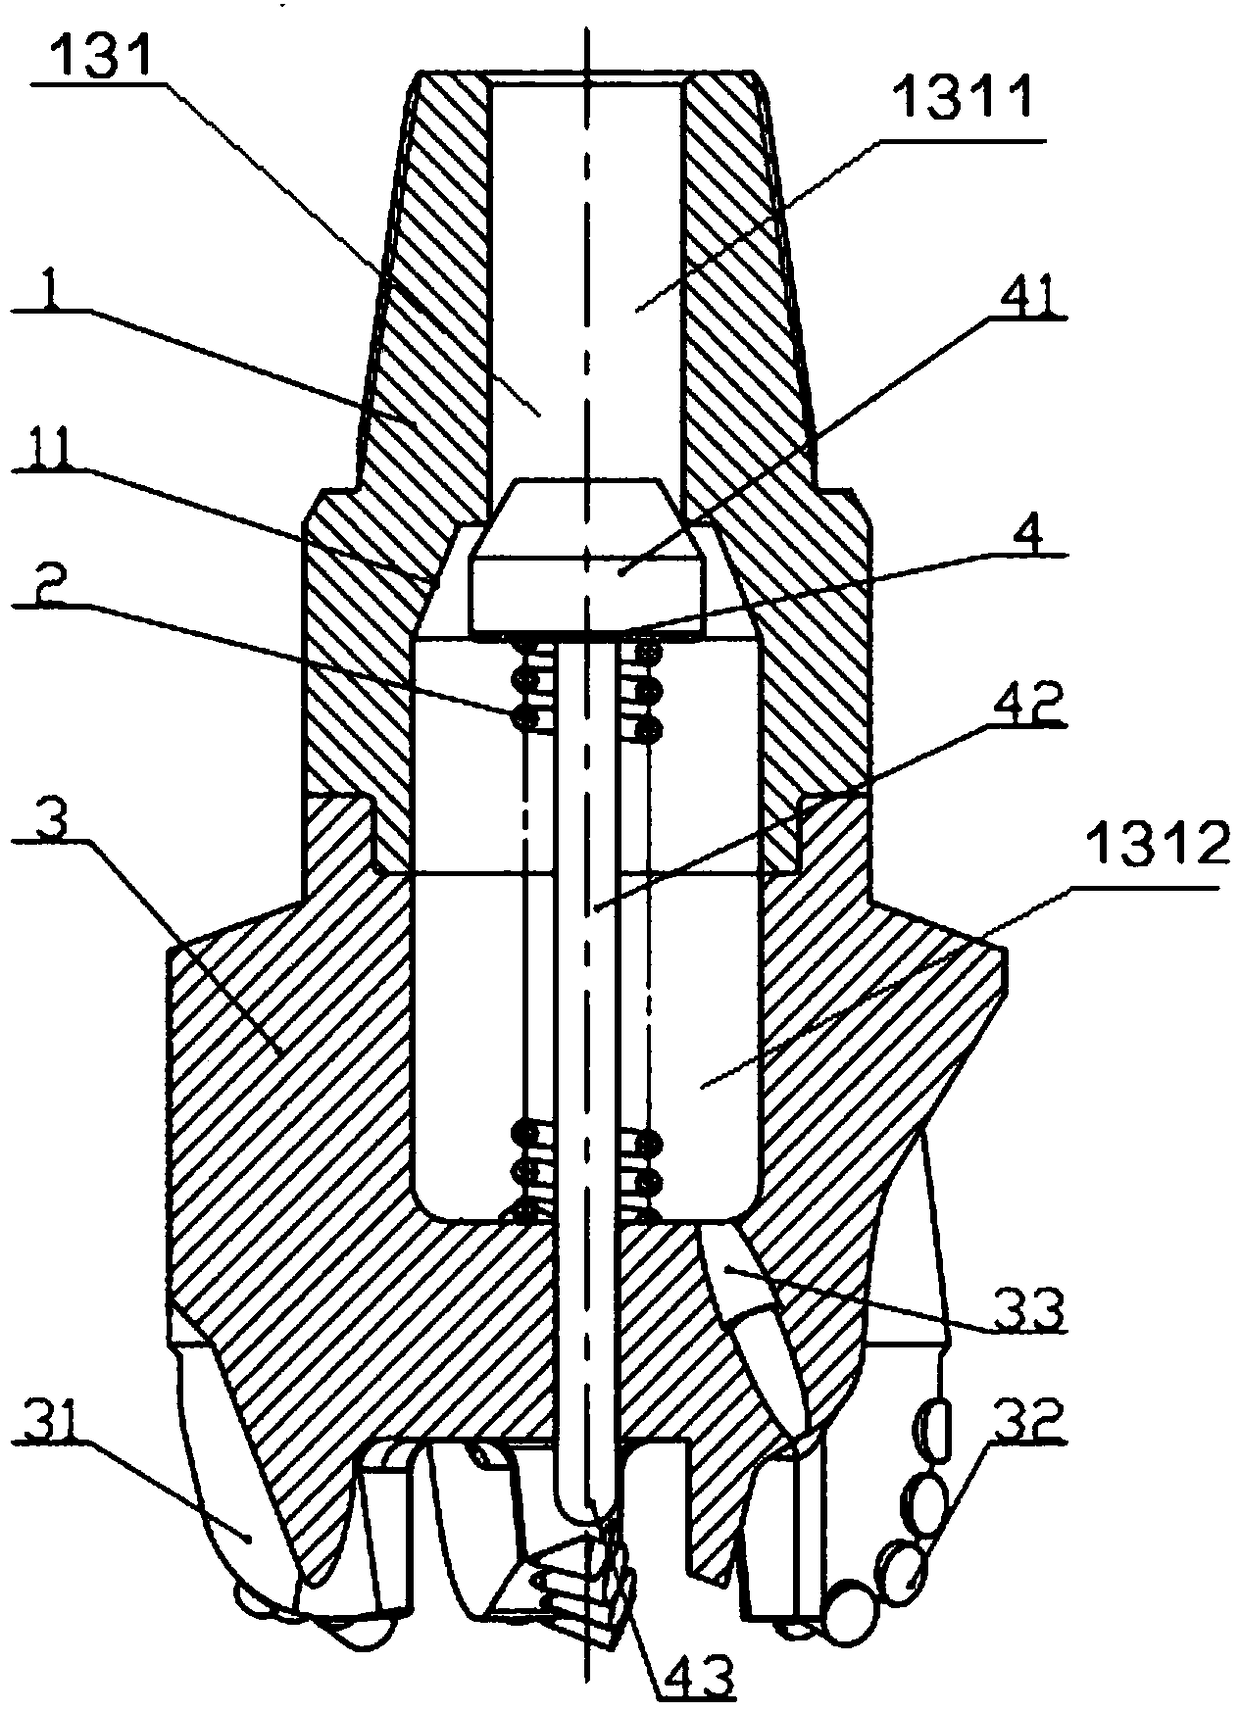 Rock breaking speed-increasing tool with hammer rod reciprocating self-impact structure